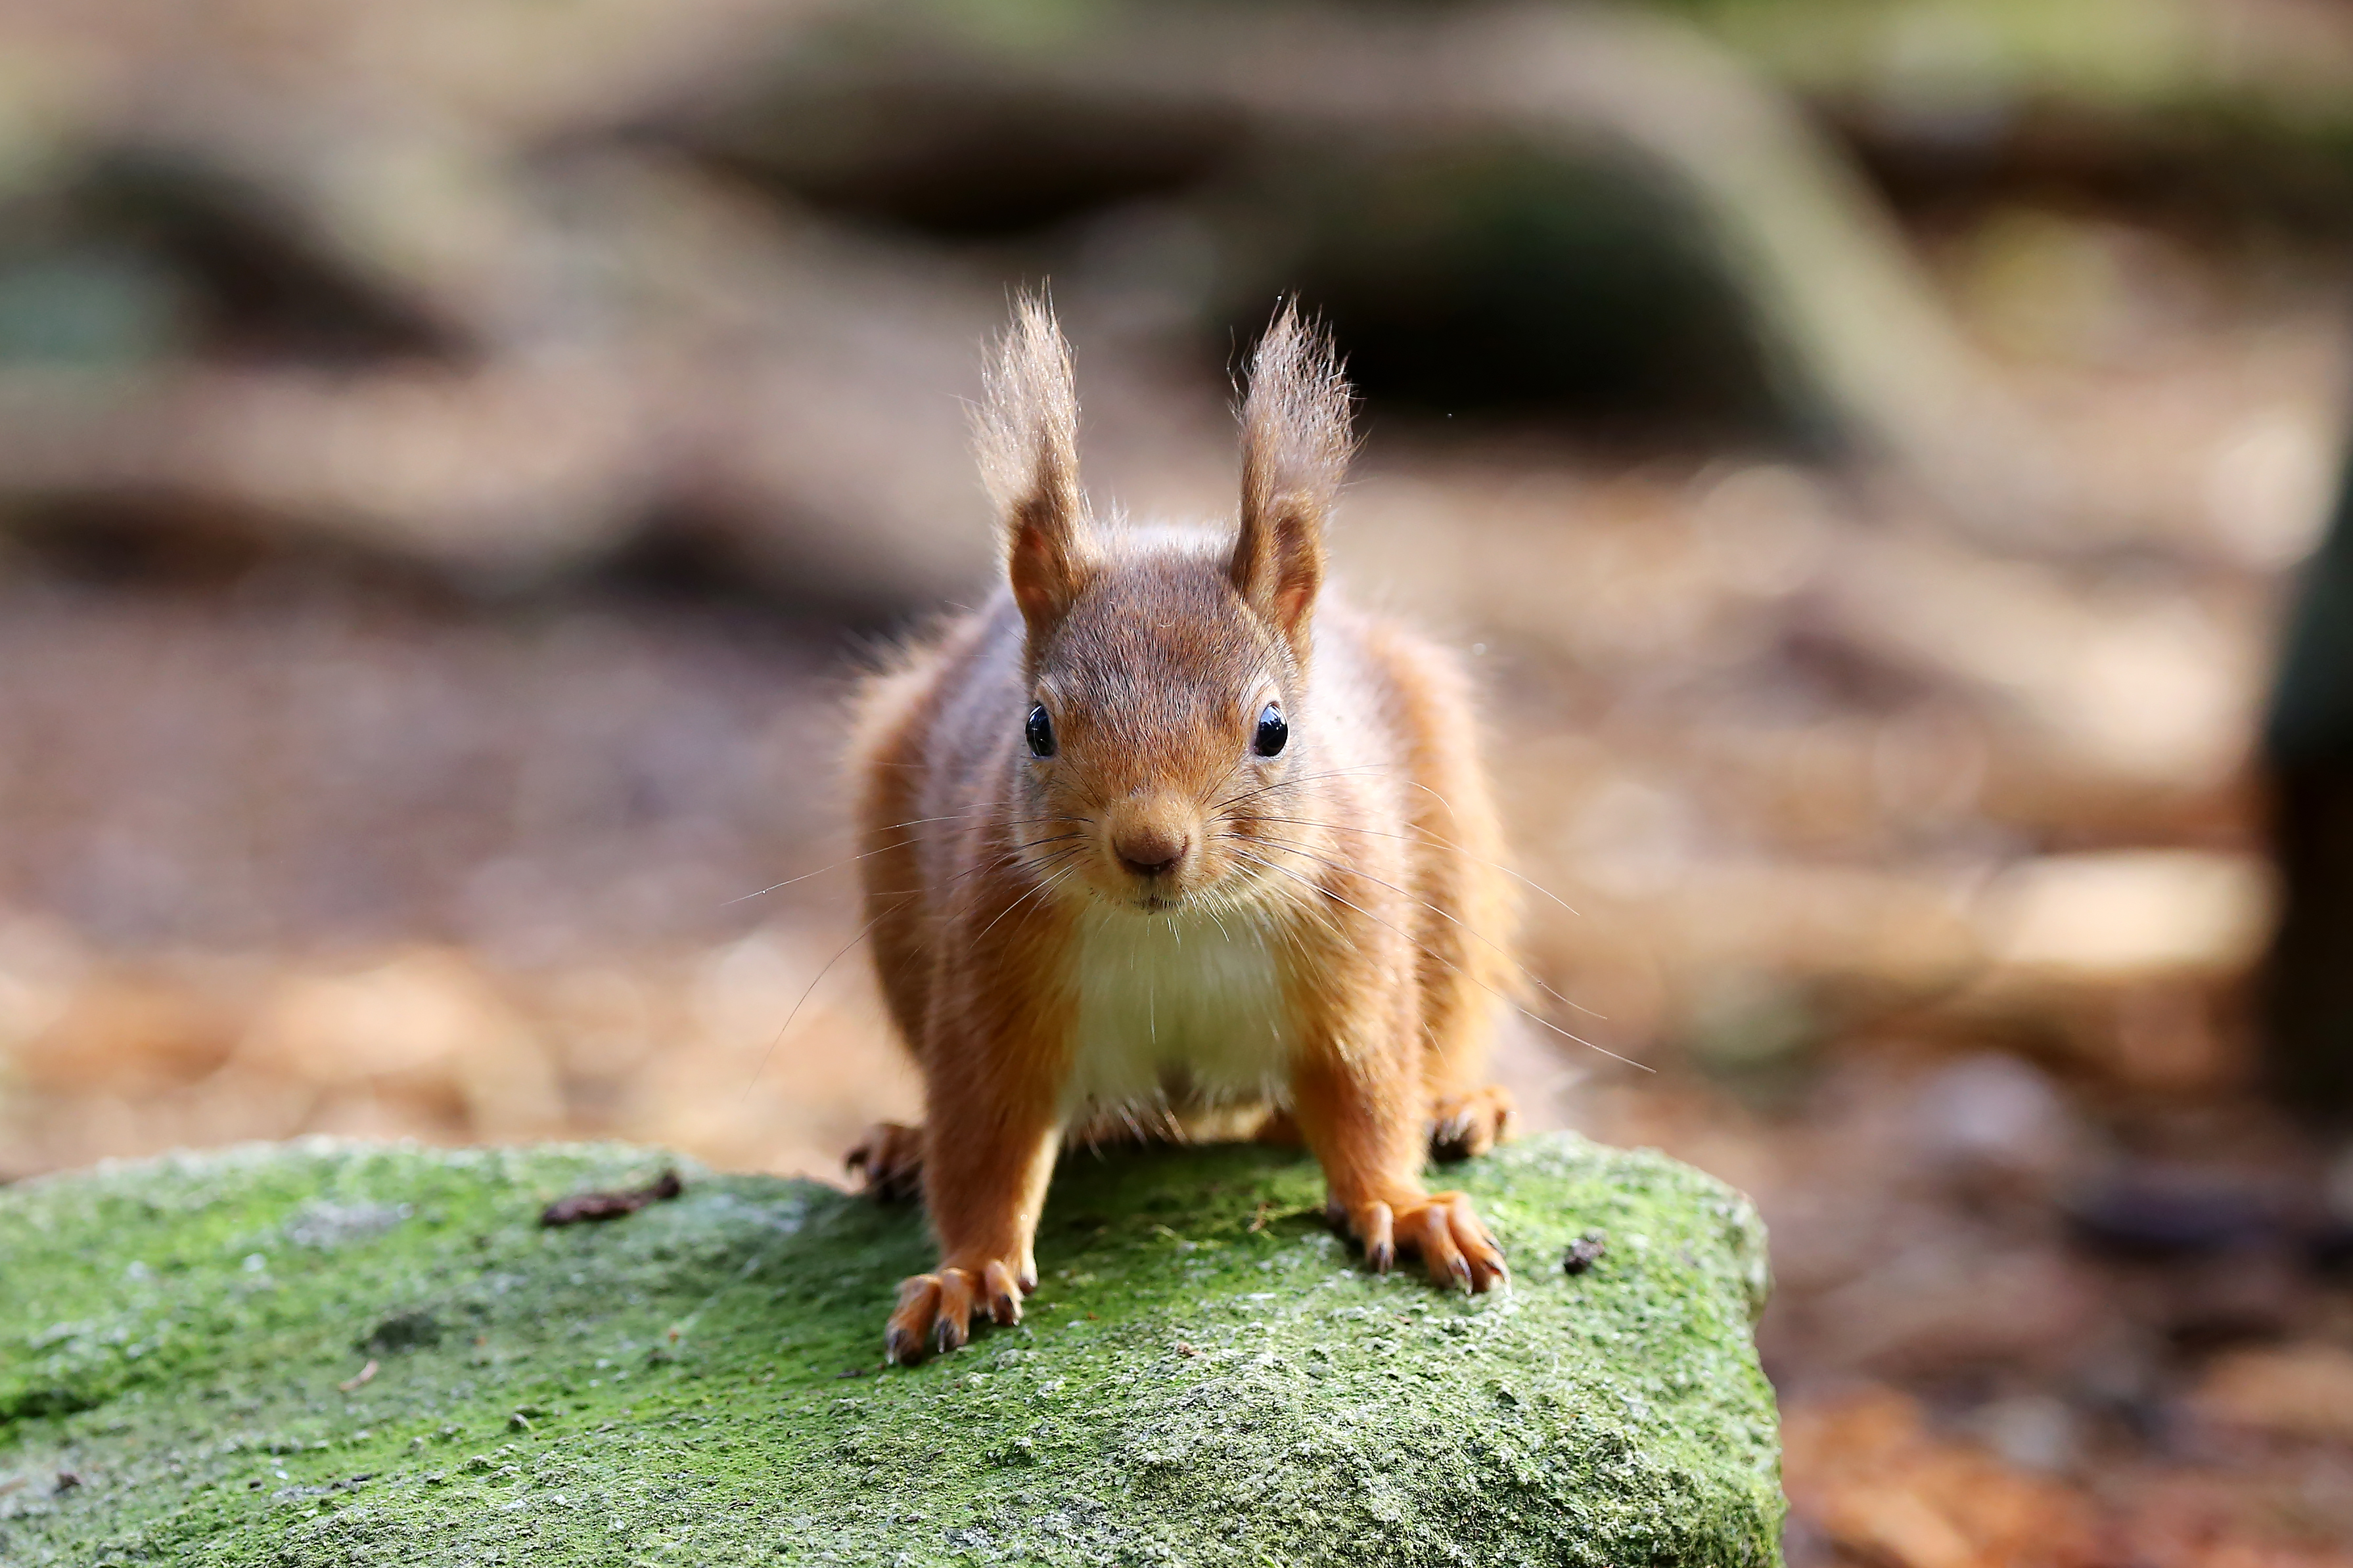 Red squirrel looking at the camera